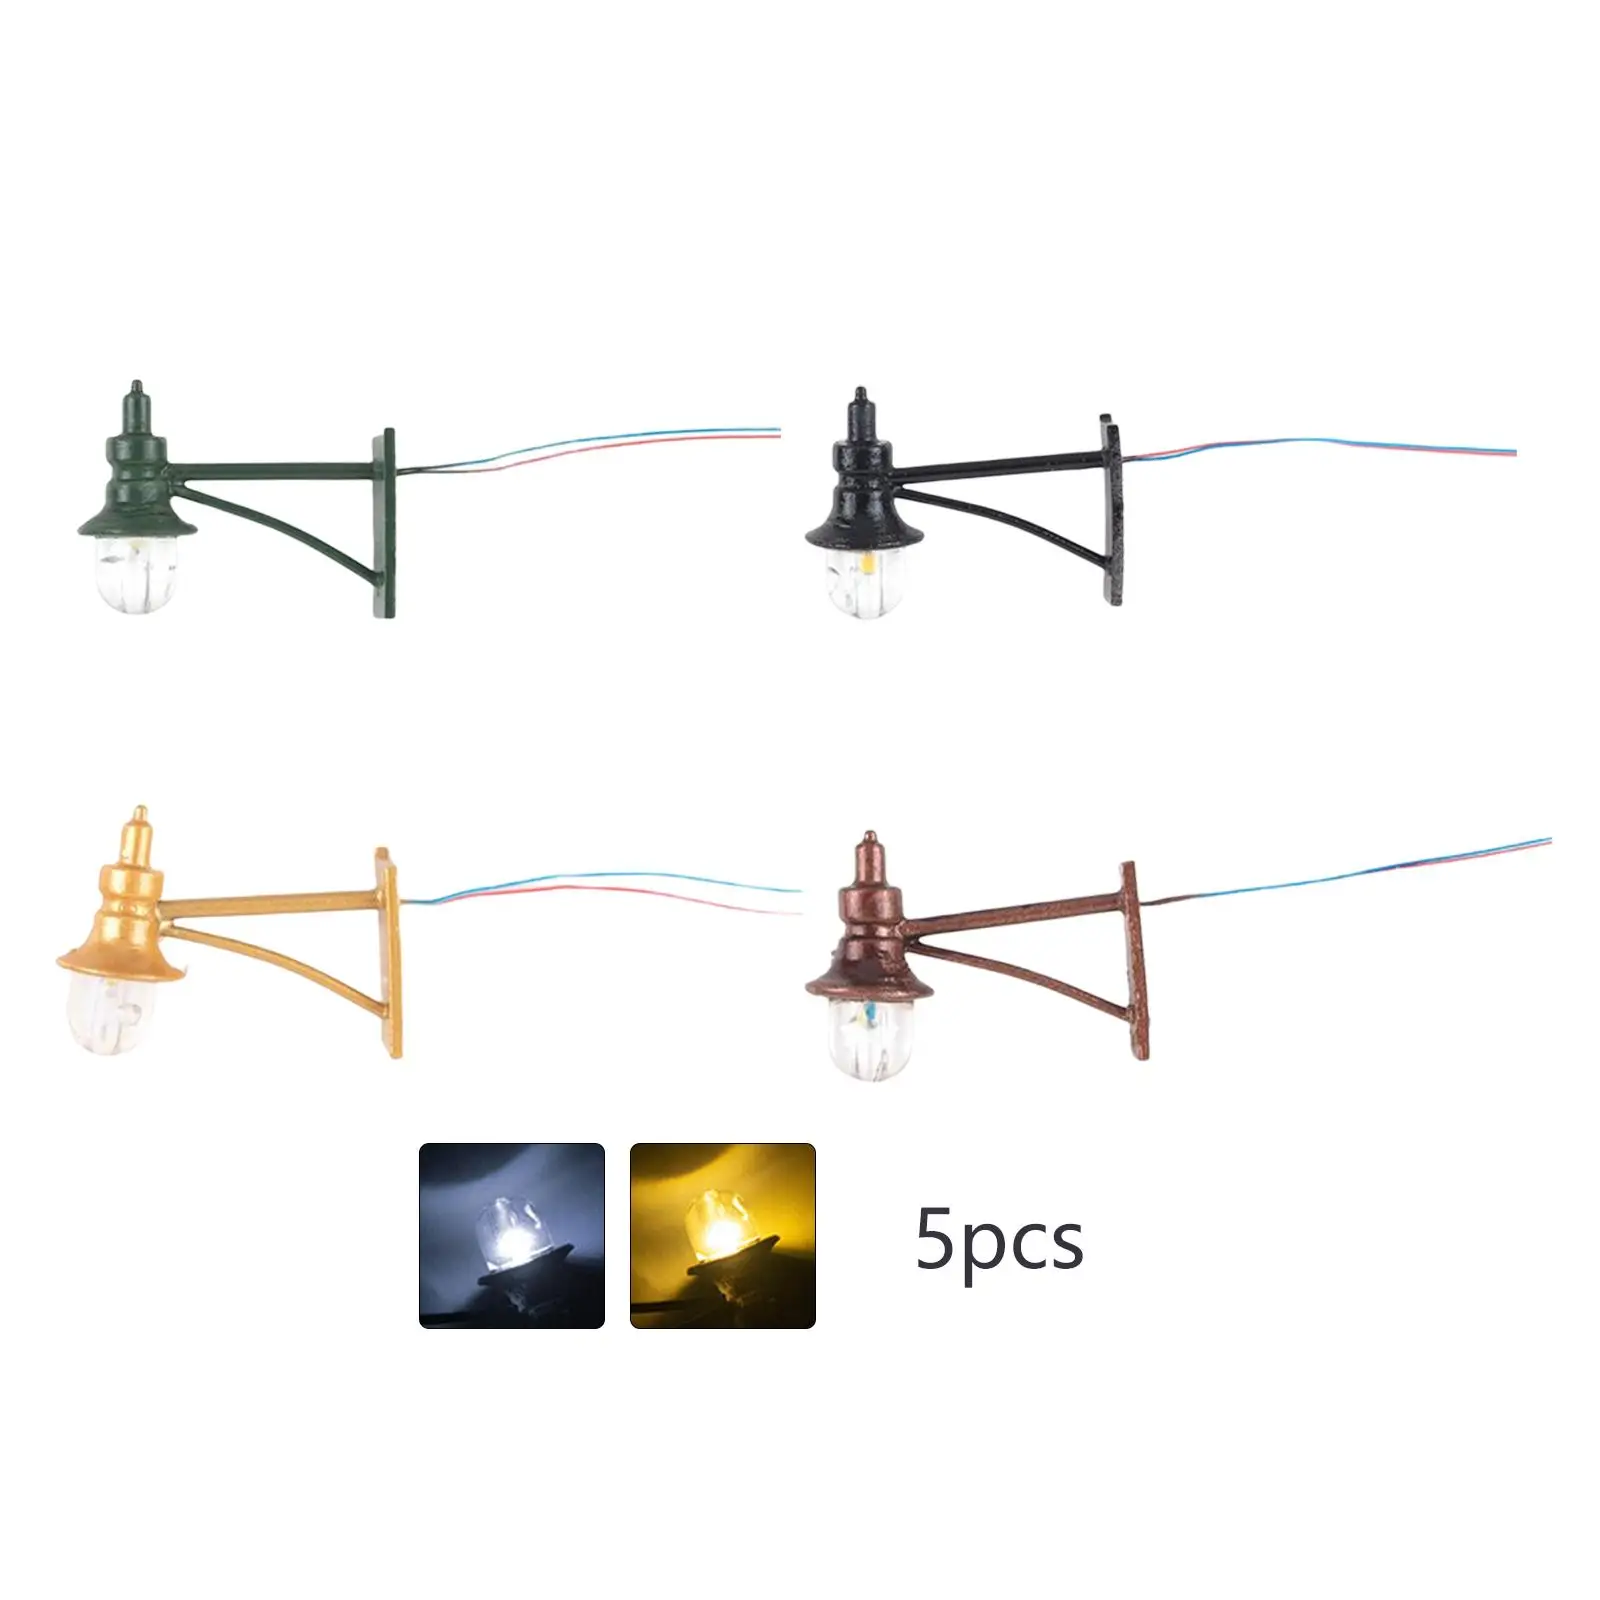 5x 1:87 Model Railway Lamps Miniature Streets Lamps for Courtyard Living Scene Accessories